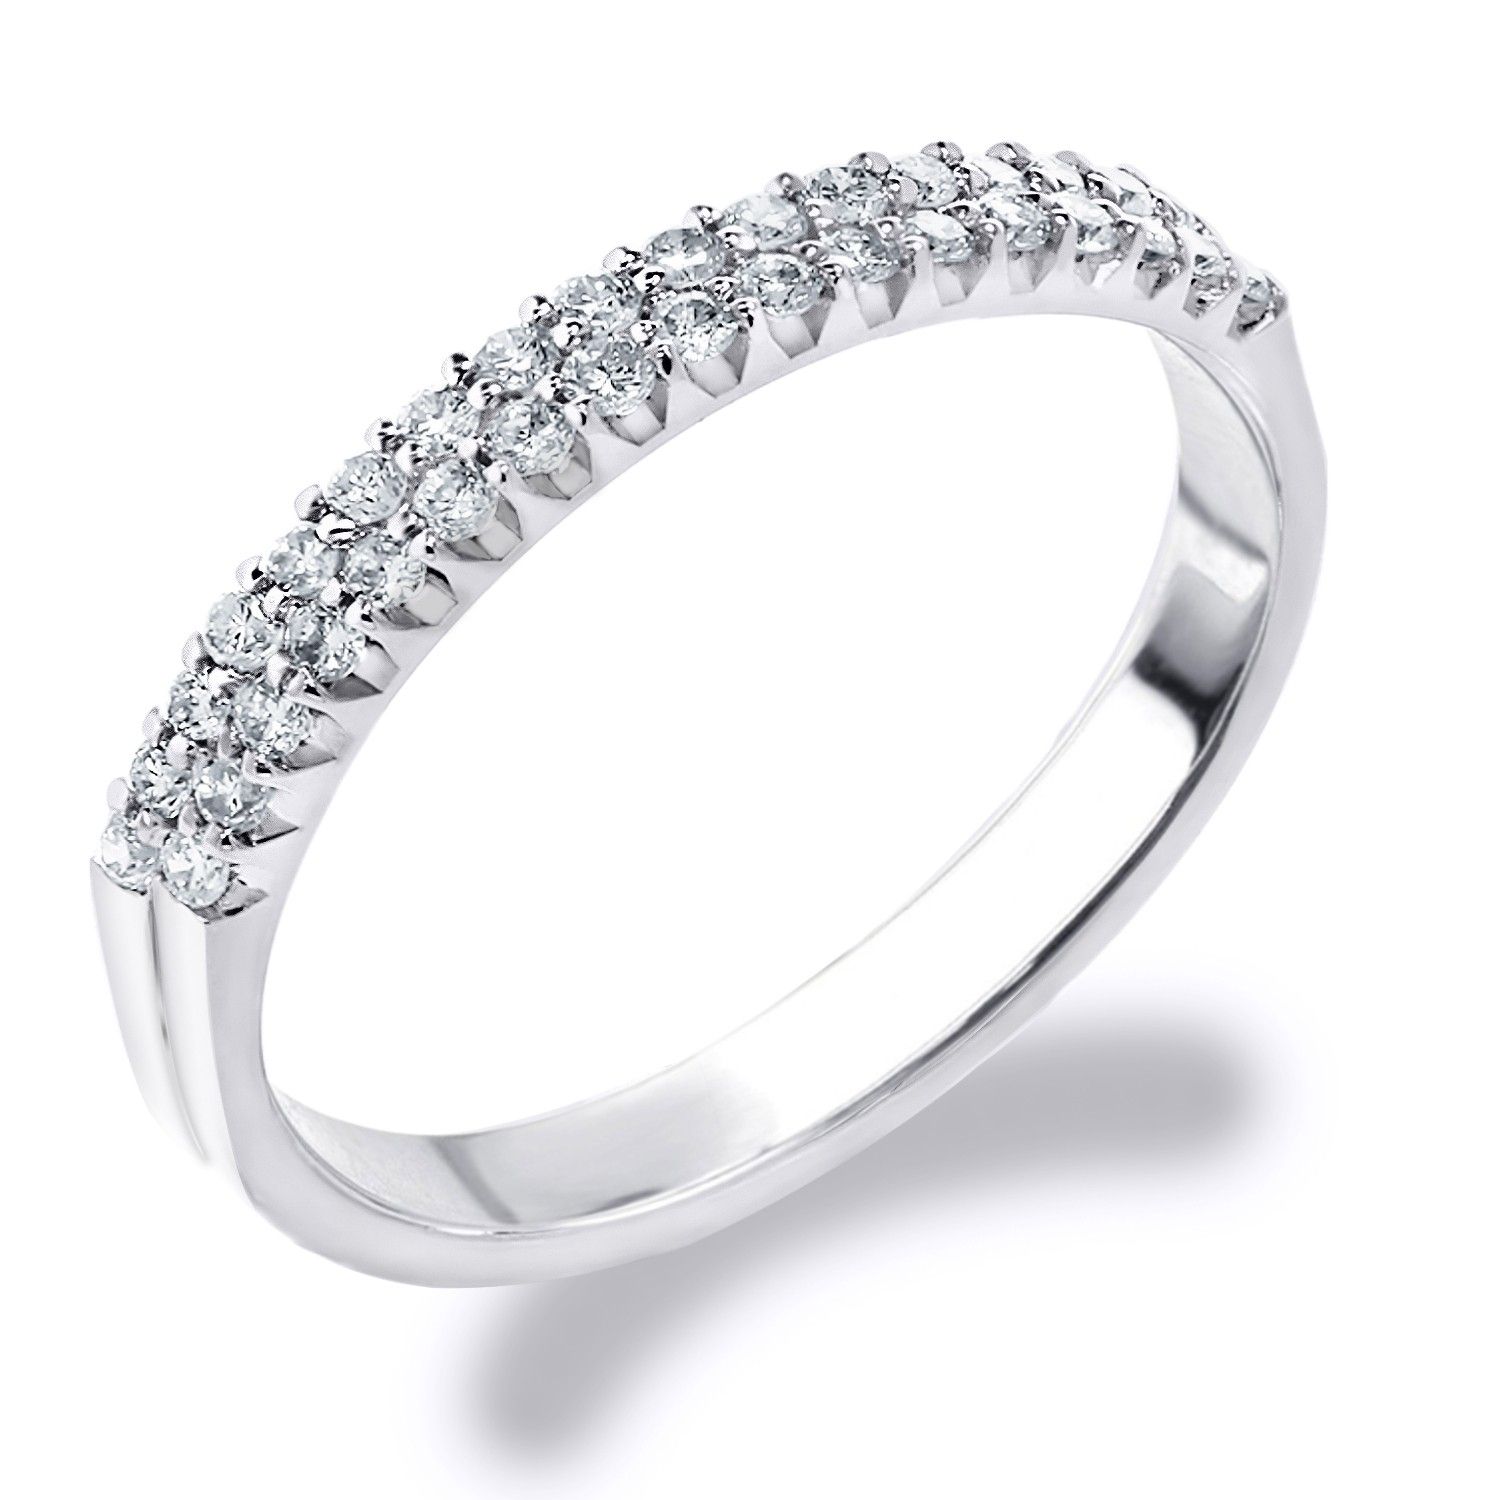 Double Row Diamond Ring | Shared Prong Ring | Eternity Pertaining To Best And Newest Enhanced Black And White Diamond Three Row Anniversary Bands In White Gold (View 24 of 25)